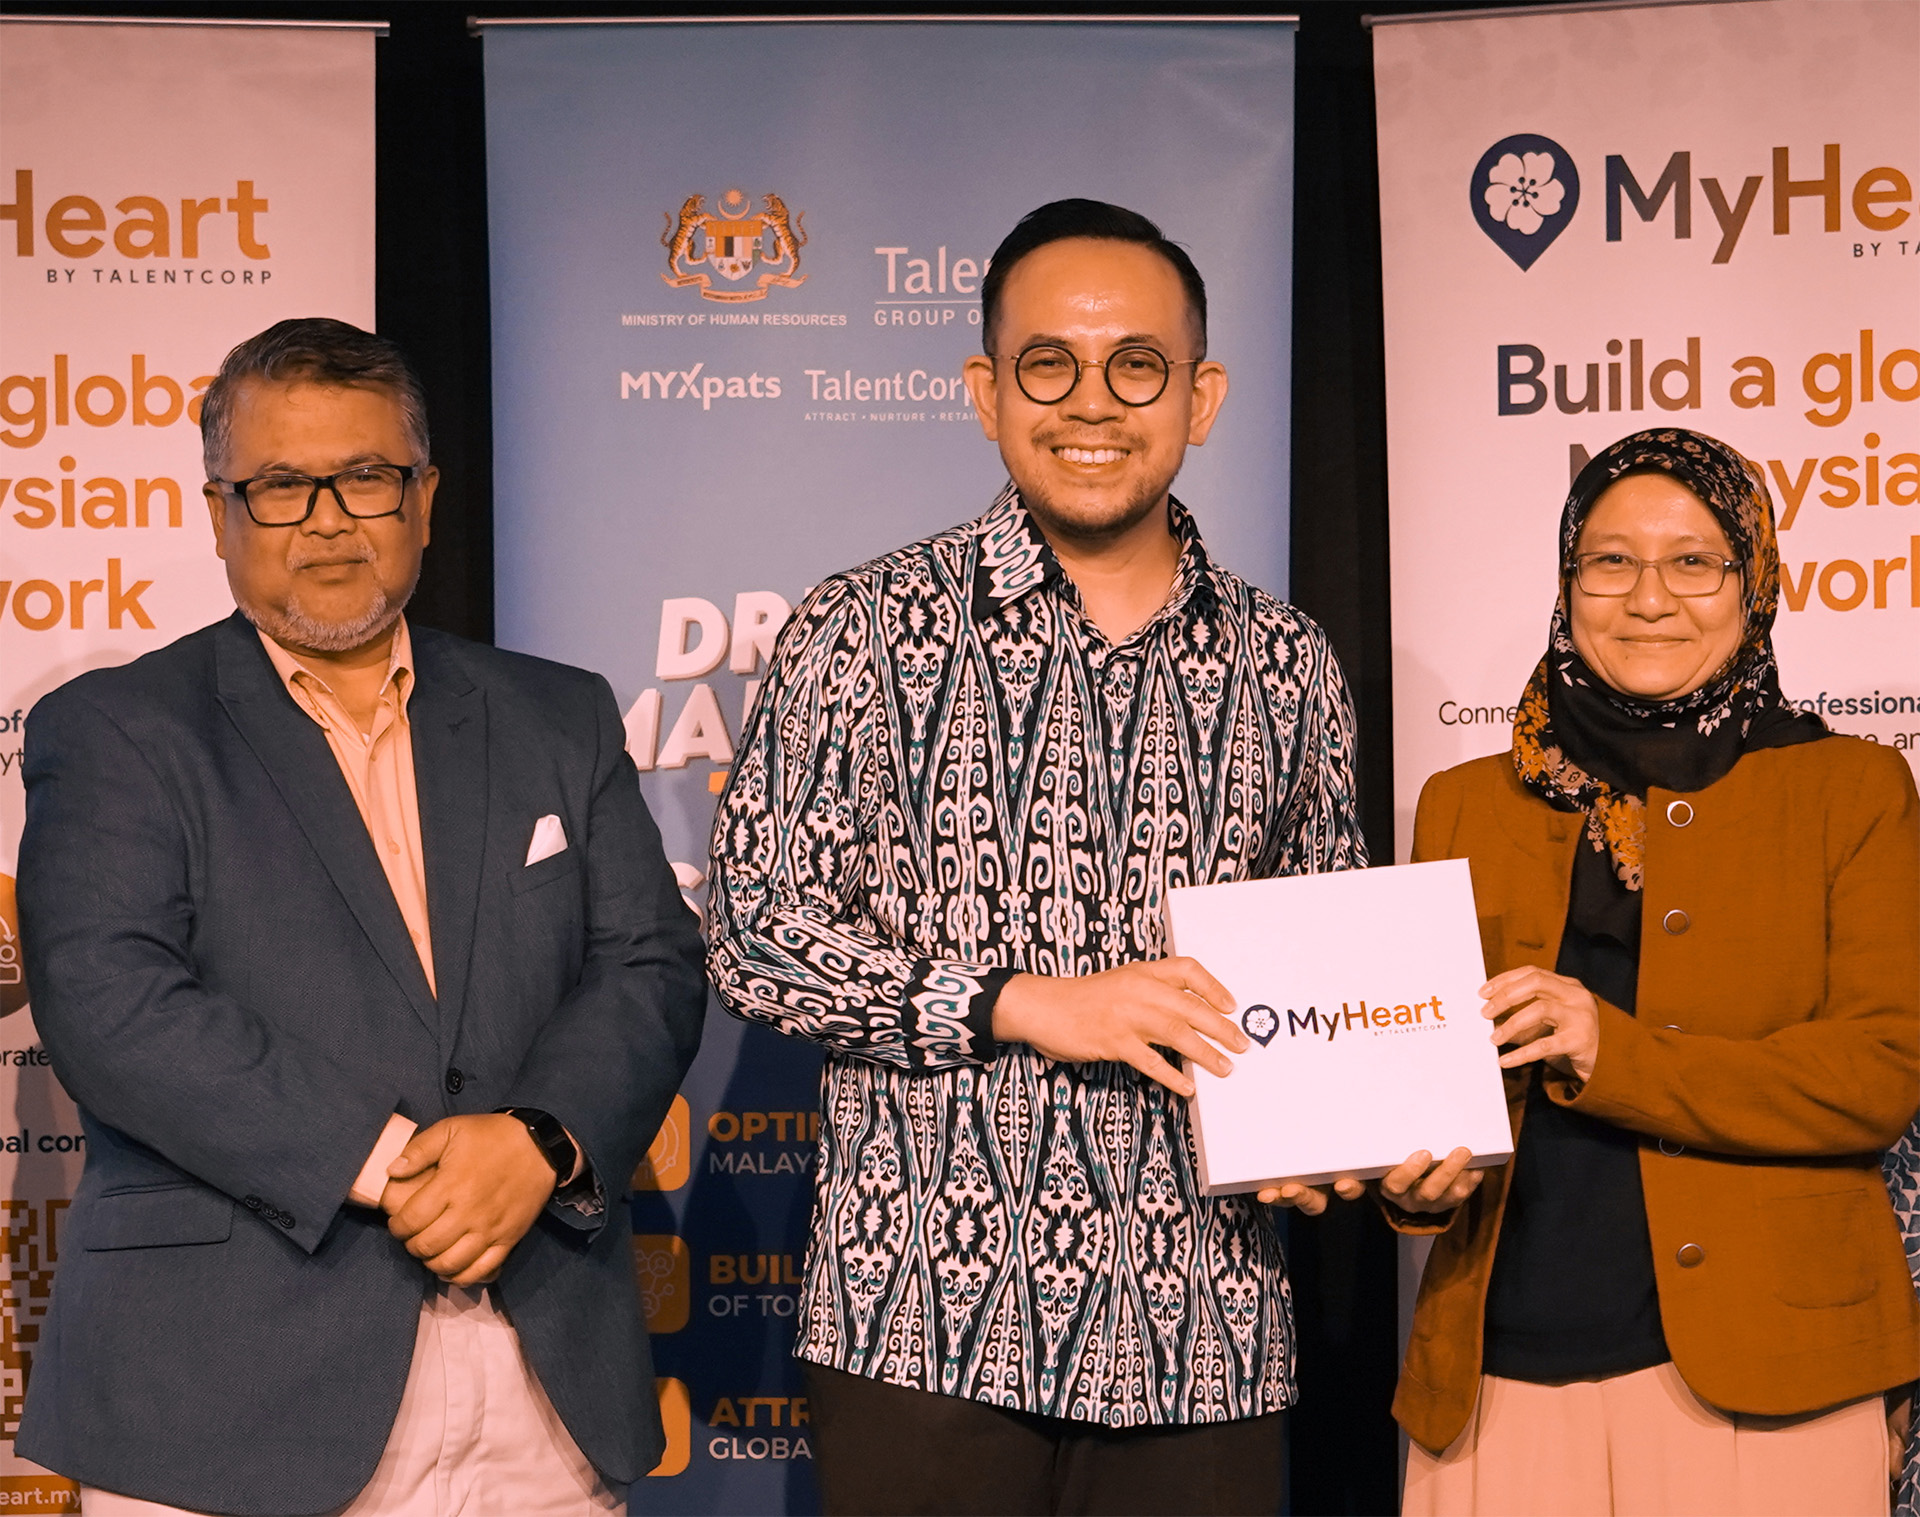 YB Steven Sim Chee Keong, Minister of Human Resources together presented the MyHeart Platform Token to Professor Dr. Ainurul Rosli 